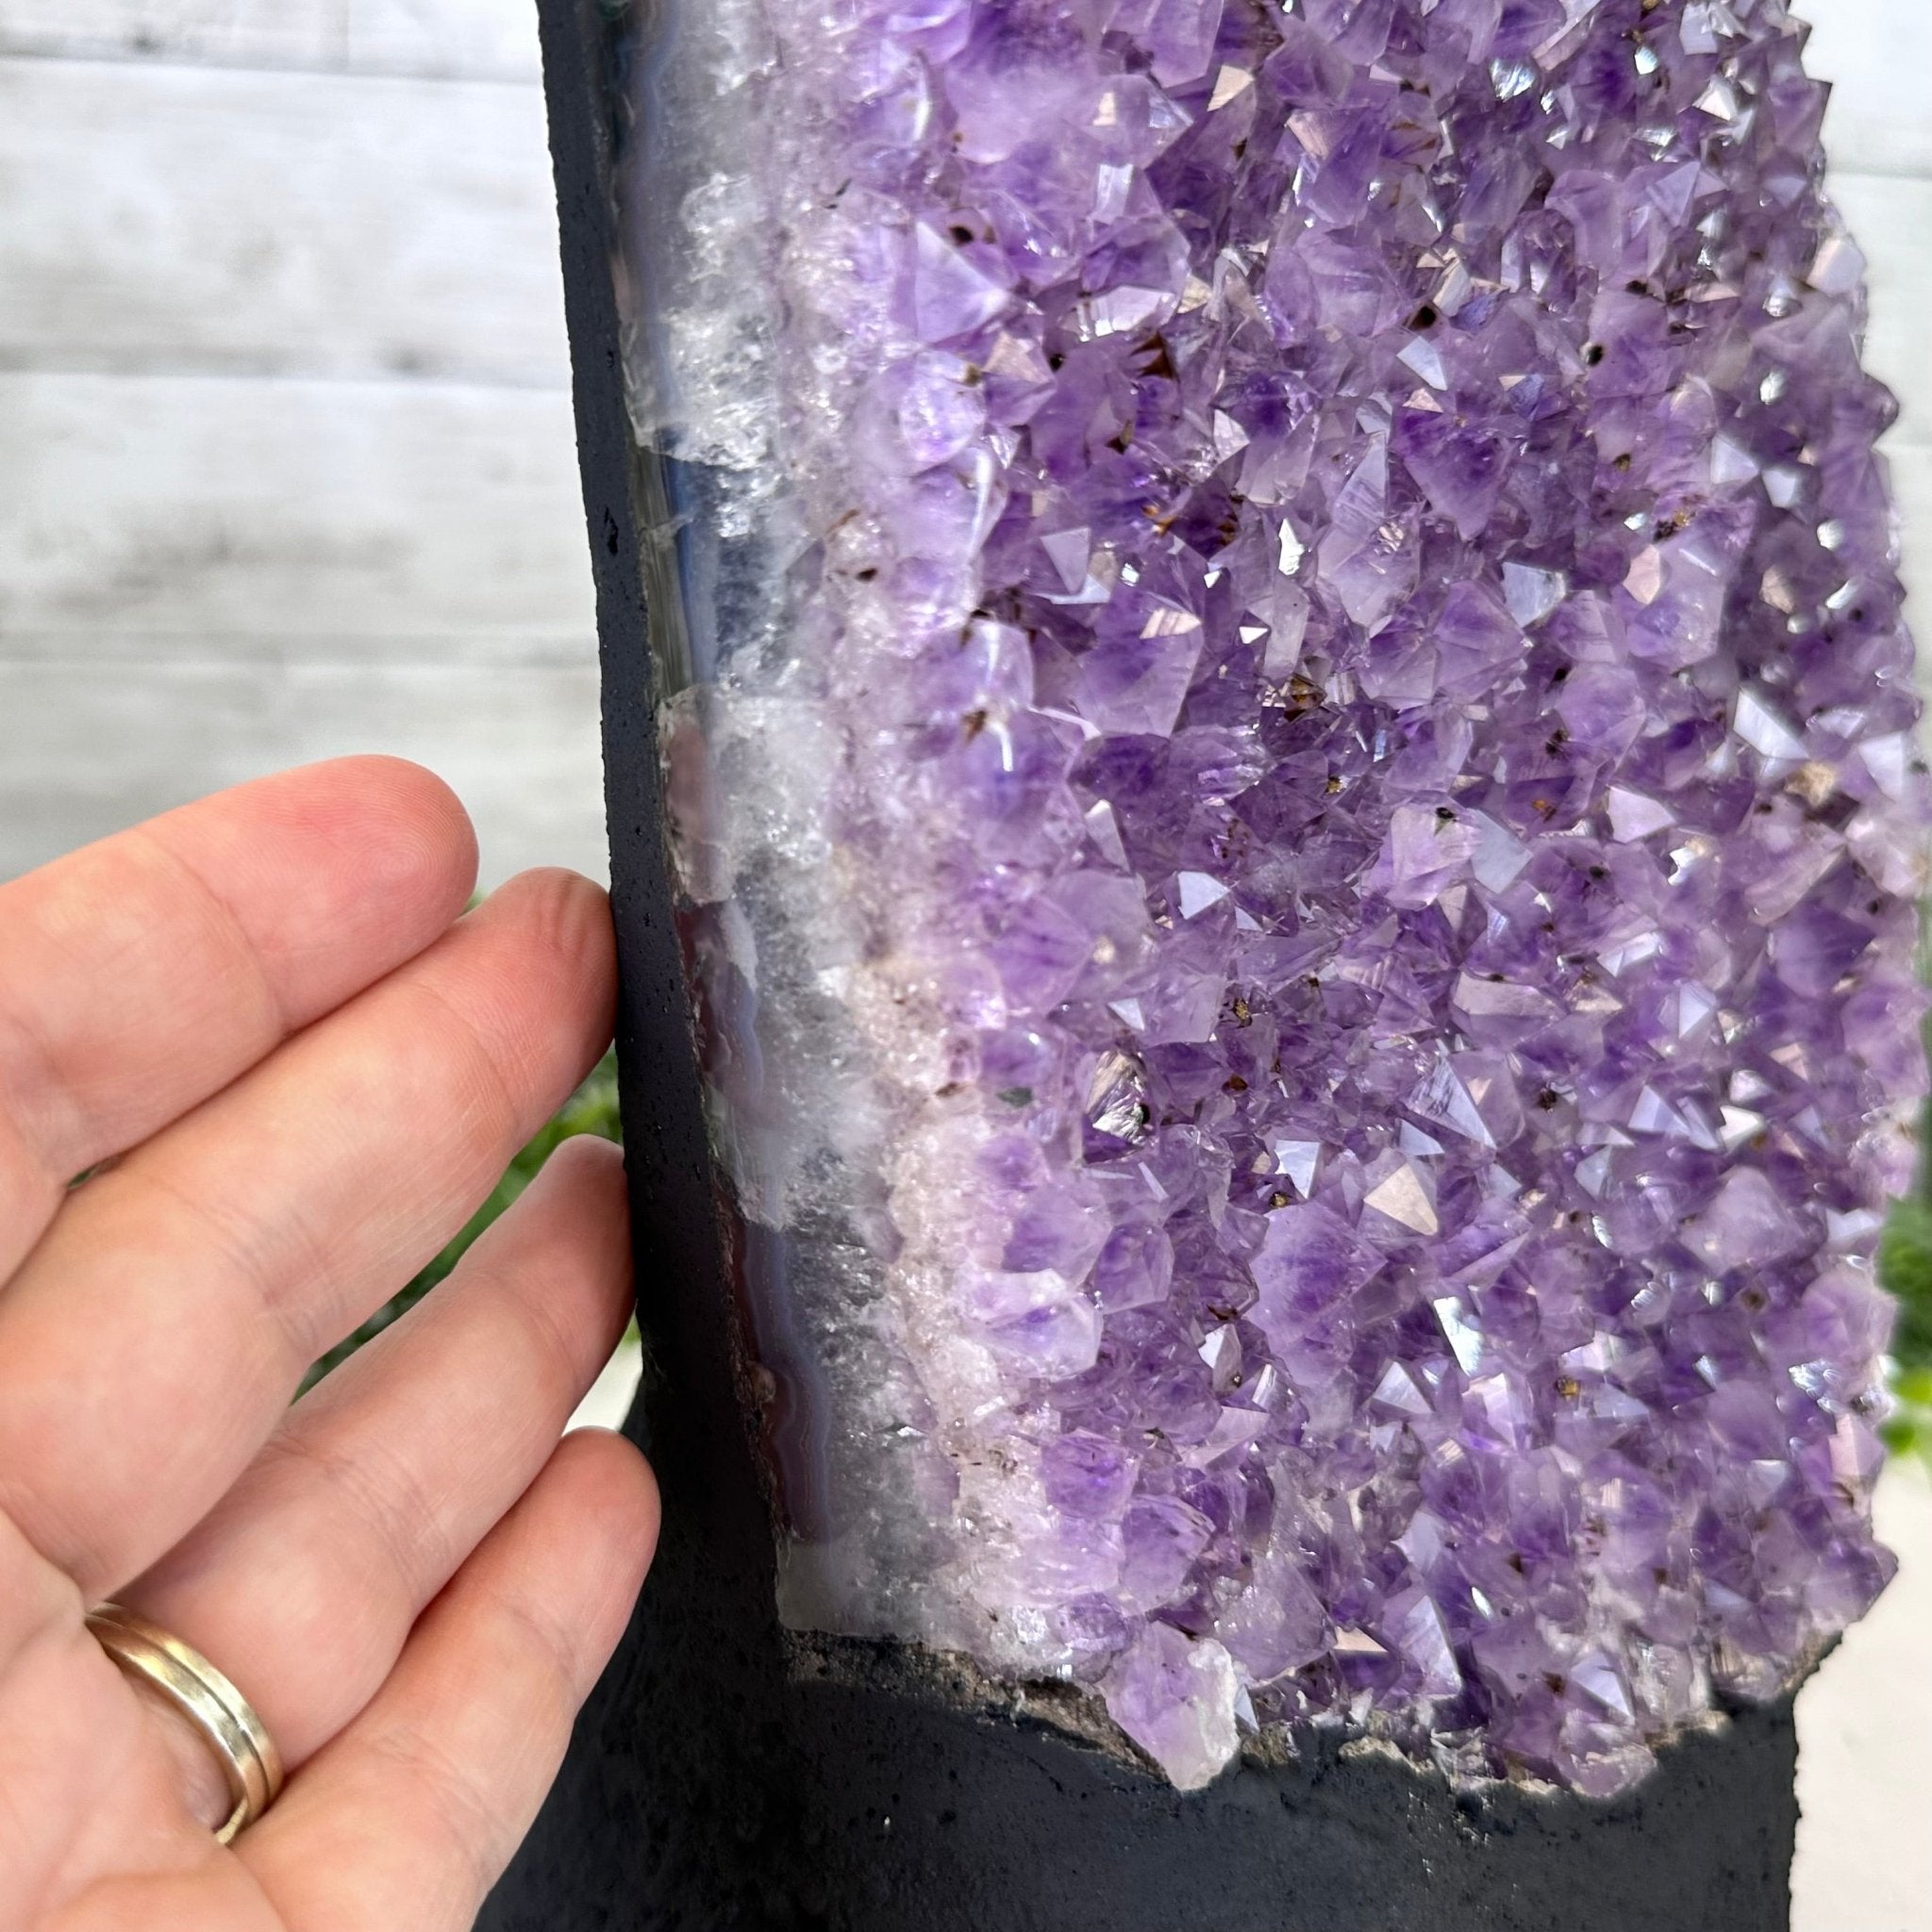 Extra Quality Amethyst Cluster, Cement Base, 11.25" Tall #5614-0109 - Brazil GemsBrazil GemsExtra Quality Amethyst Cluster, Cement Base, 11.25" Tall #5614-0109Clusters on Cement Bases5614-0109